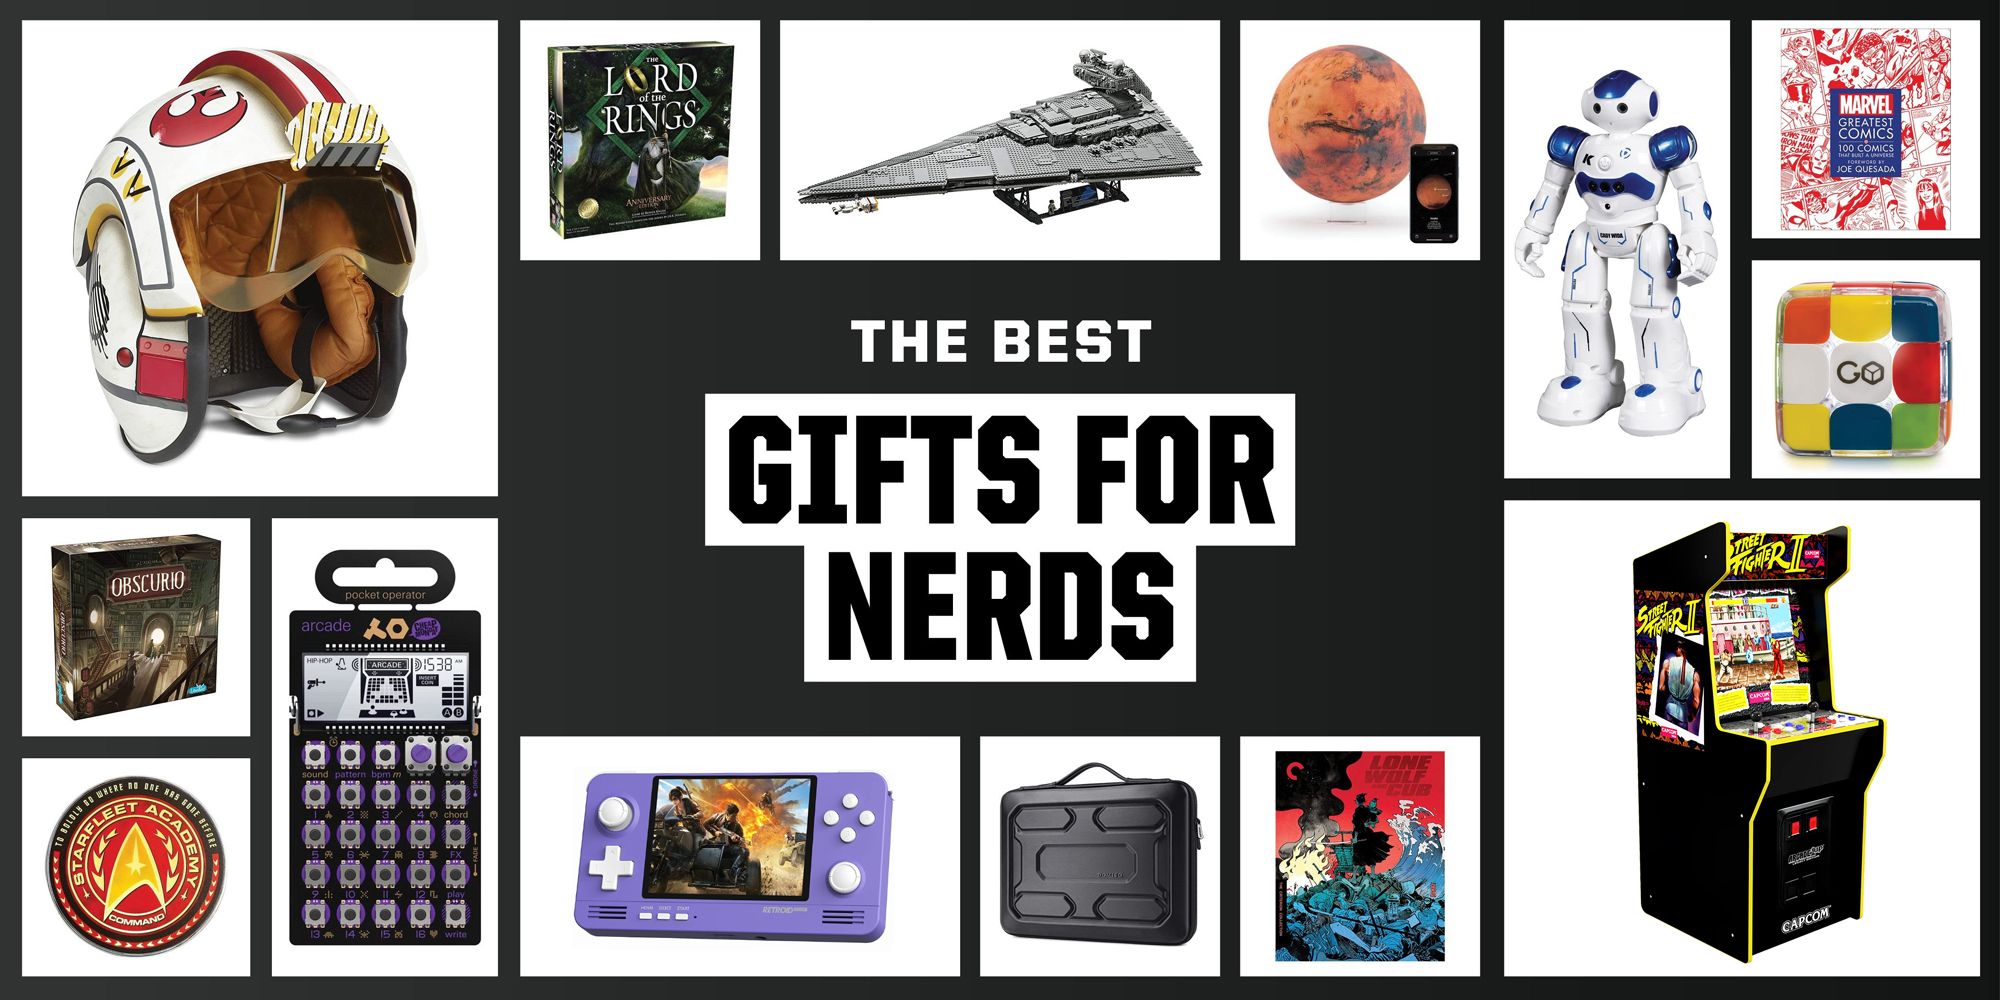 Aggregate more than 81 best gifts for computer geeks super hot